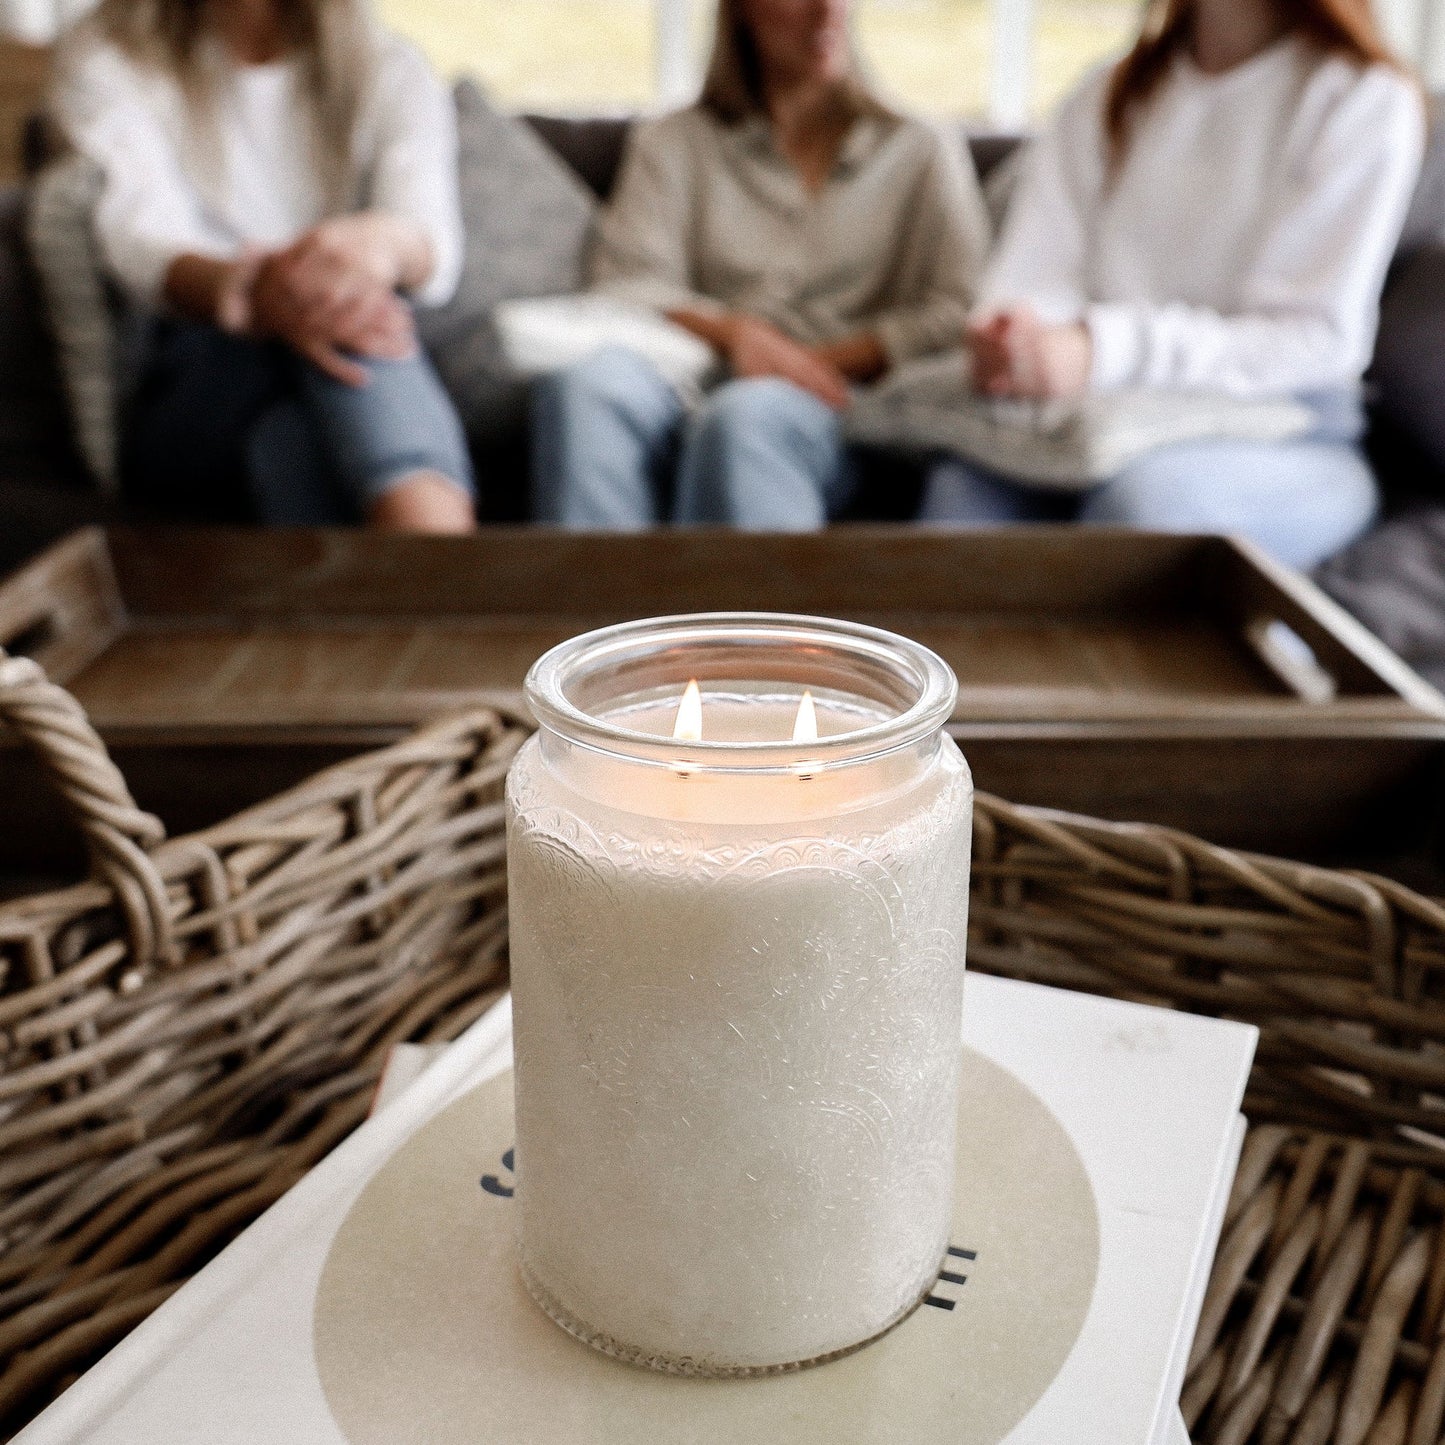 Coconut Beach Soy Candle 580g